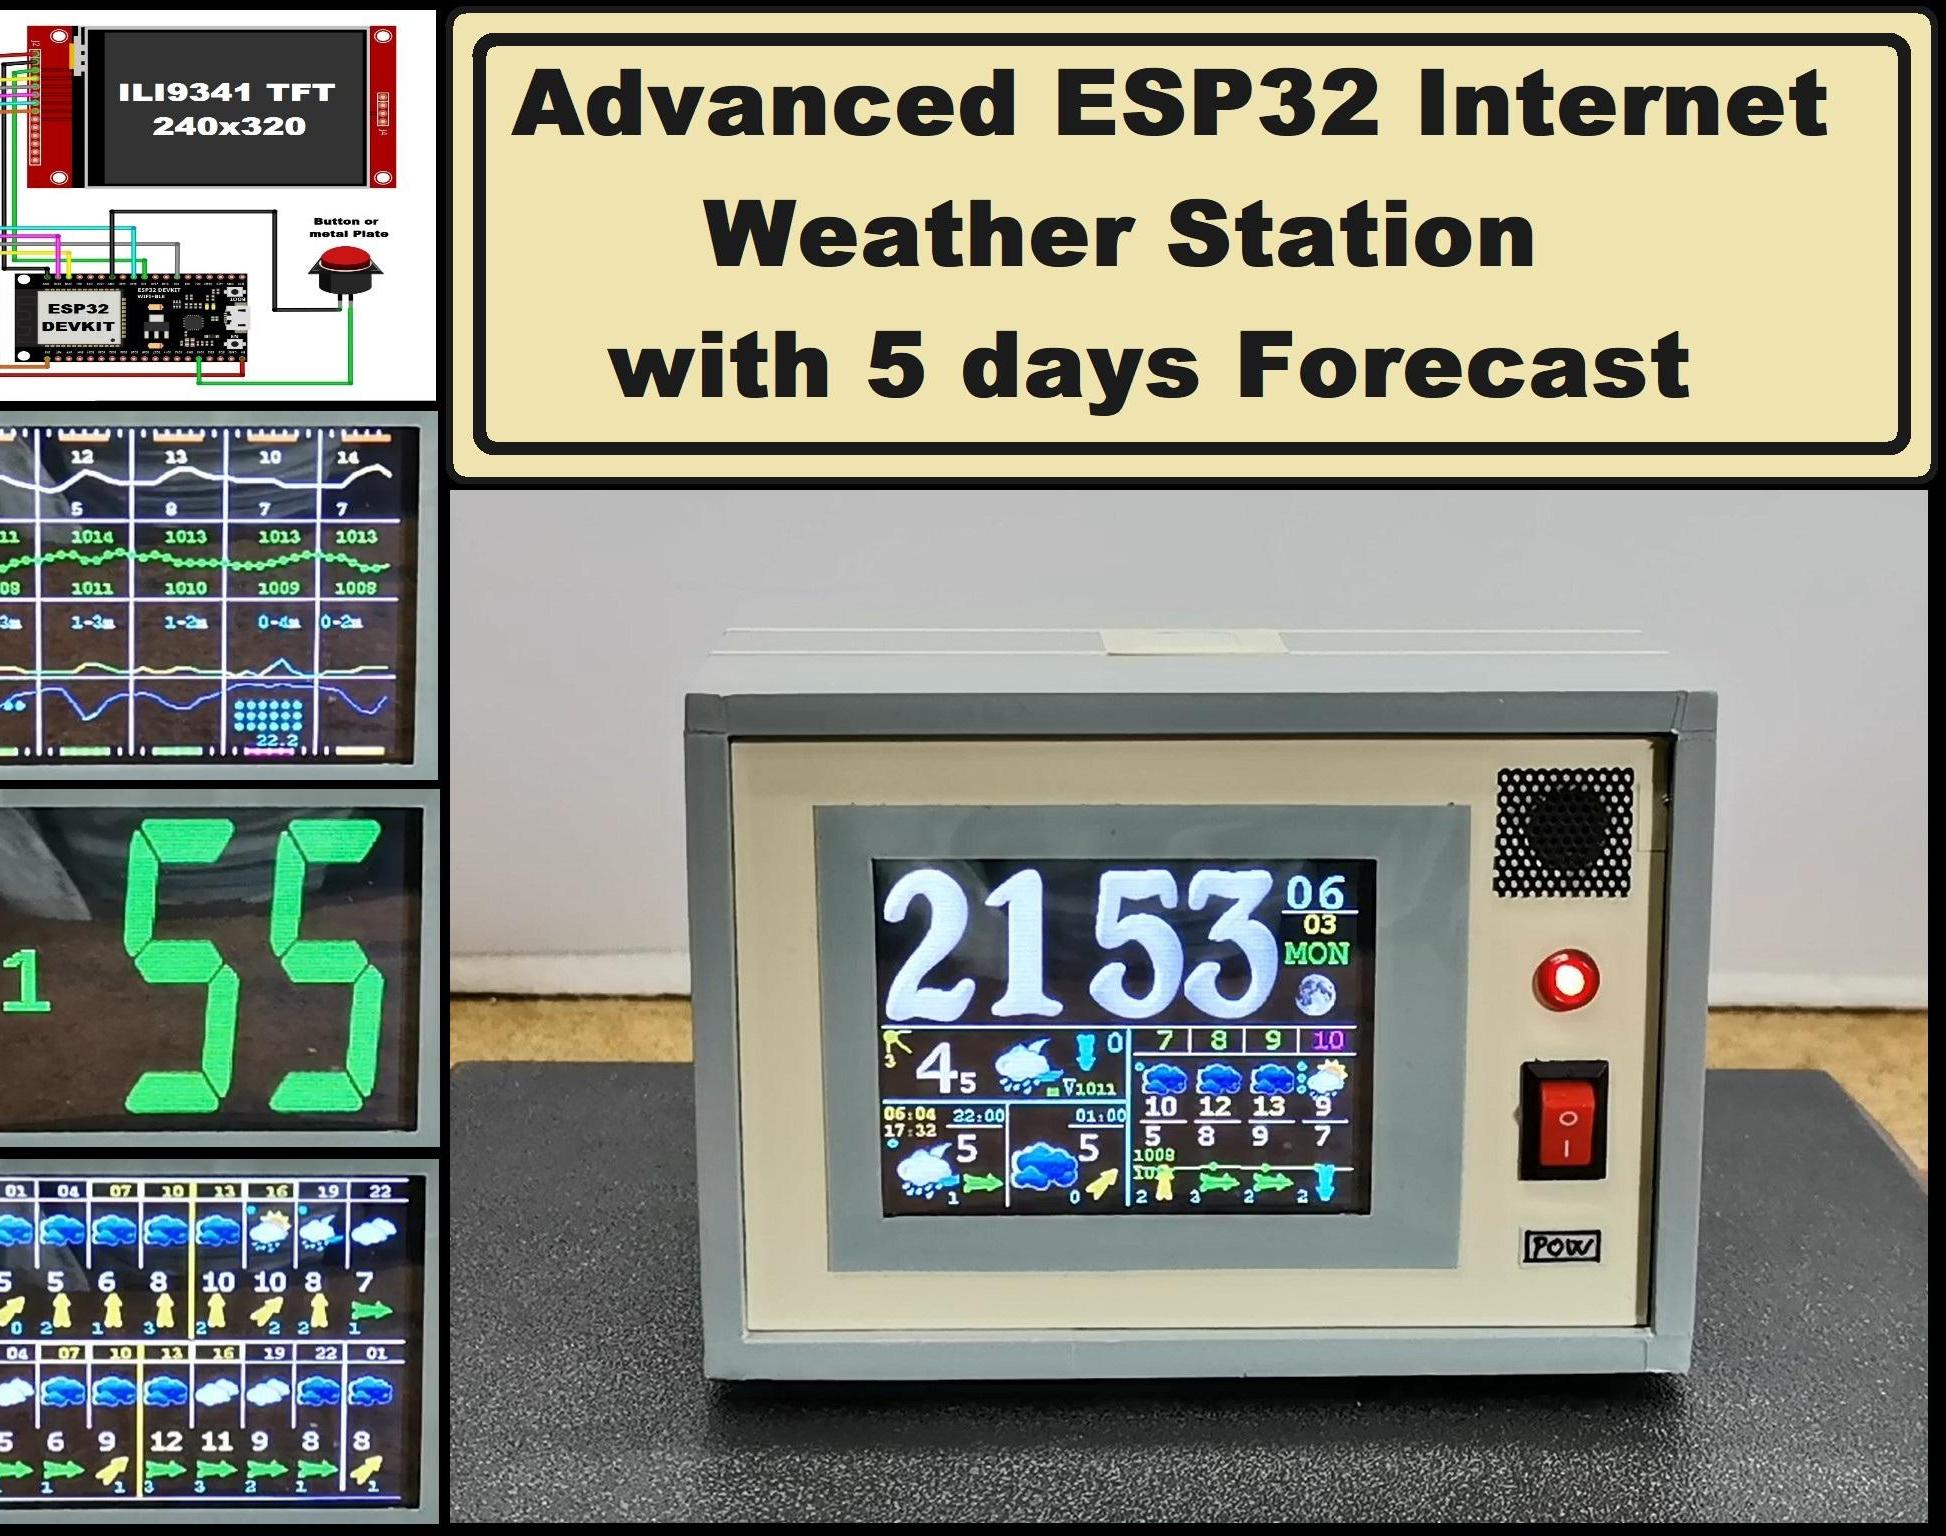 Advanced ESP32 Internet Weather Station With 5 Day Forecast